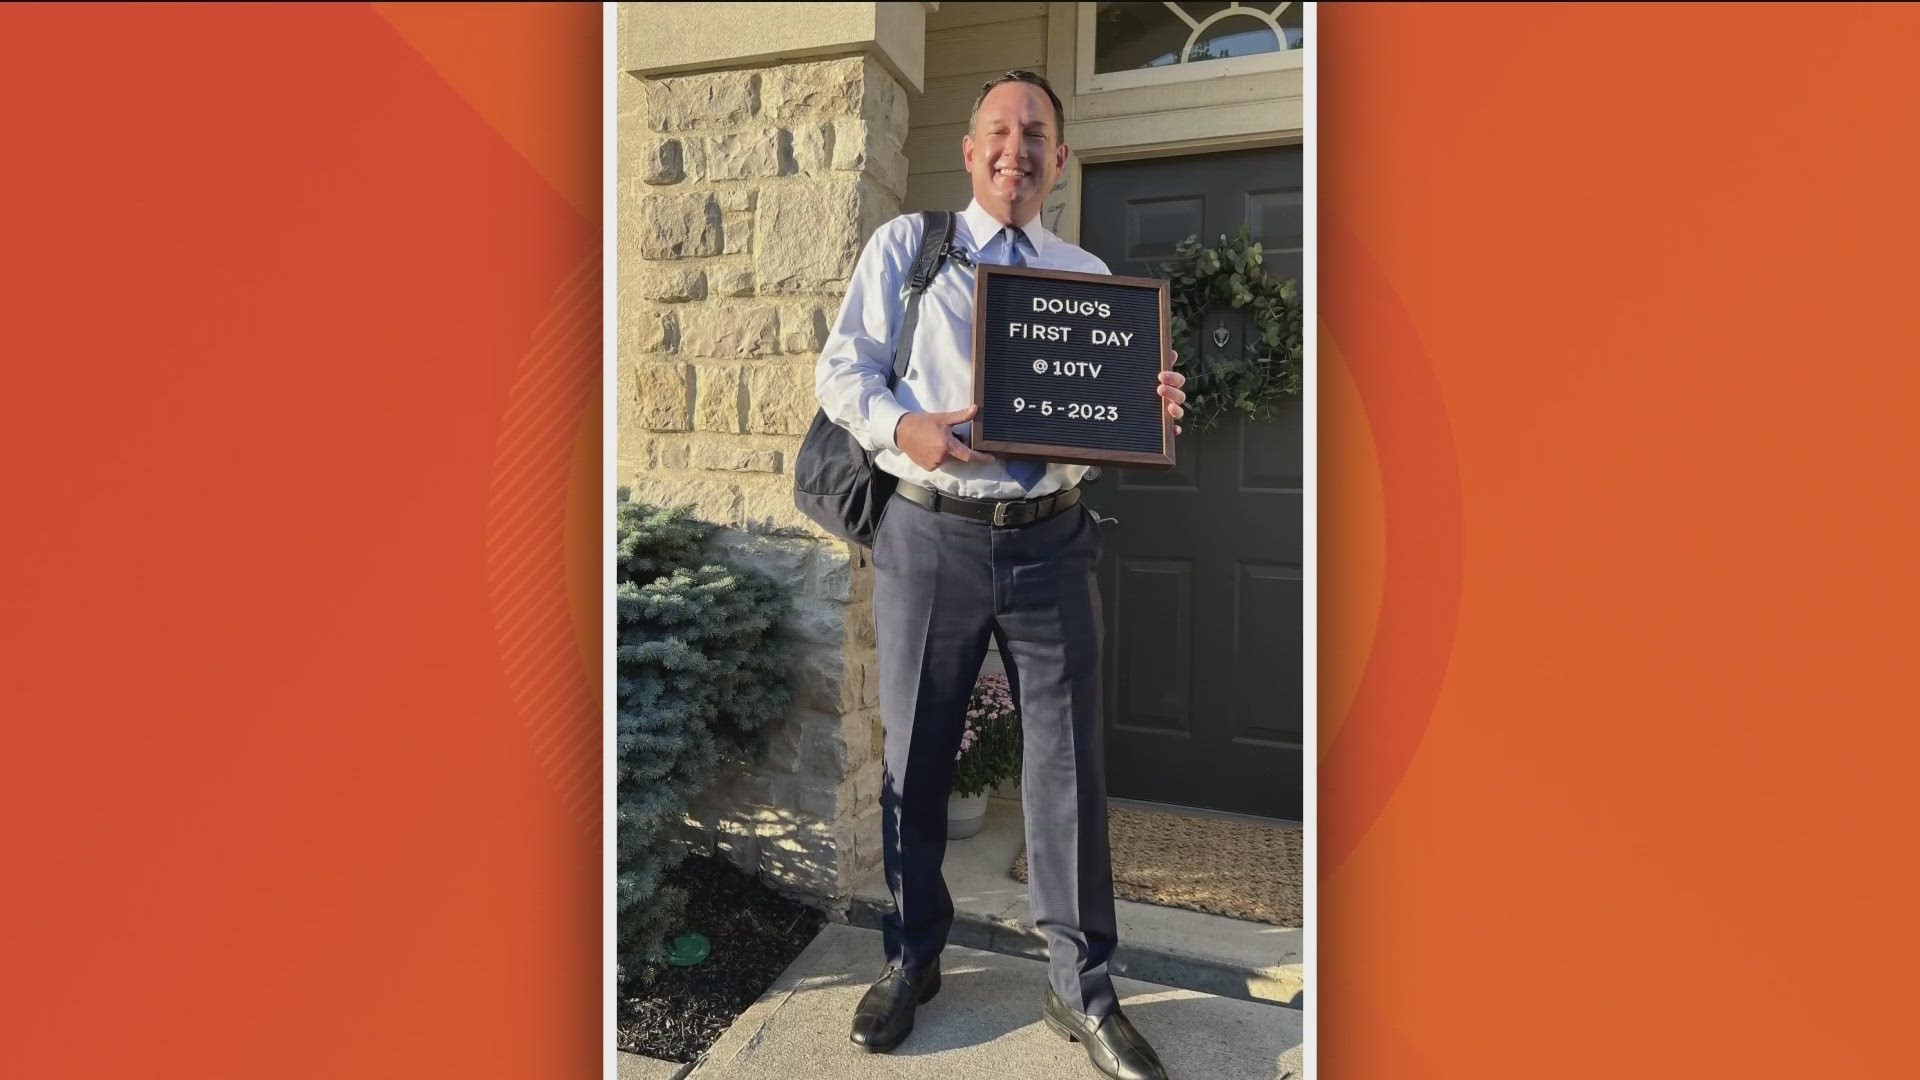 Doug Petcash left KTVB last month. On Tuesday, Doug celebrated his first "1st Day" in over 16 years with a "1st Day of School/New Job" picture. We wish you the best!